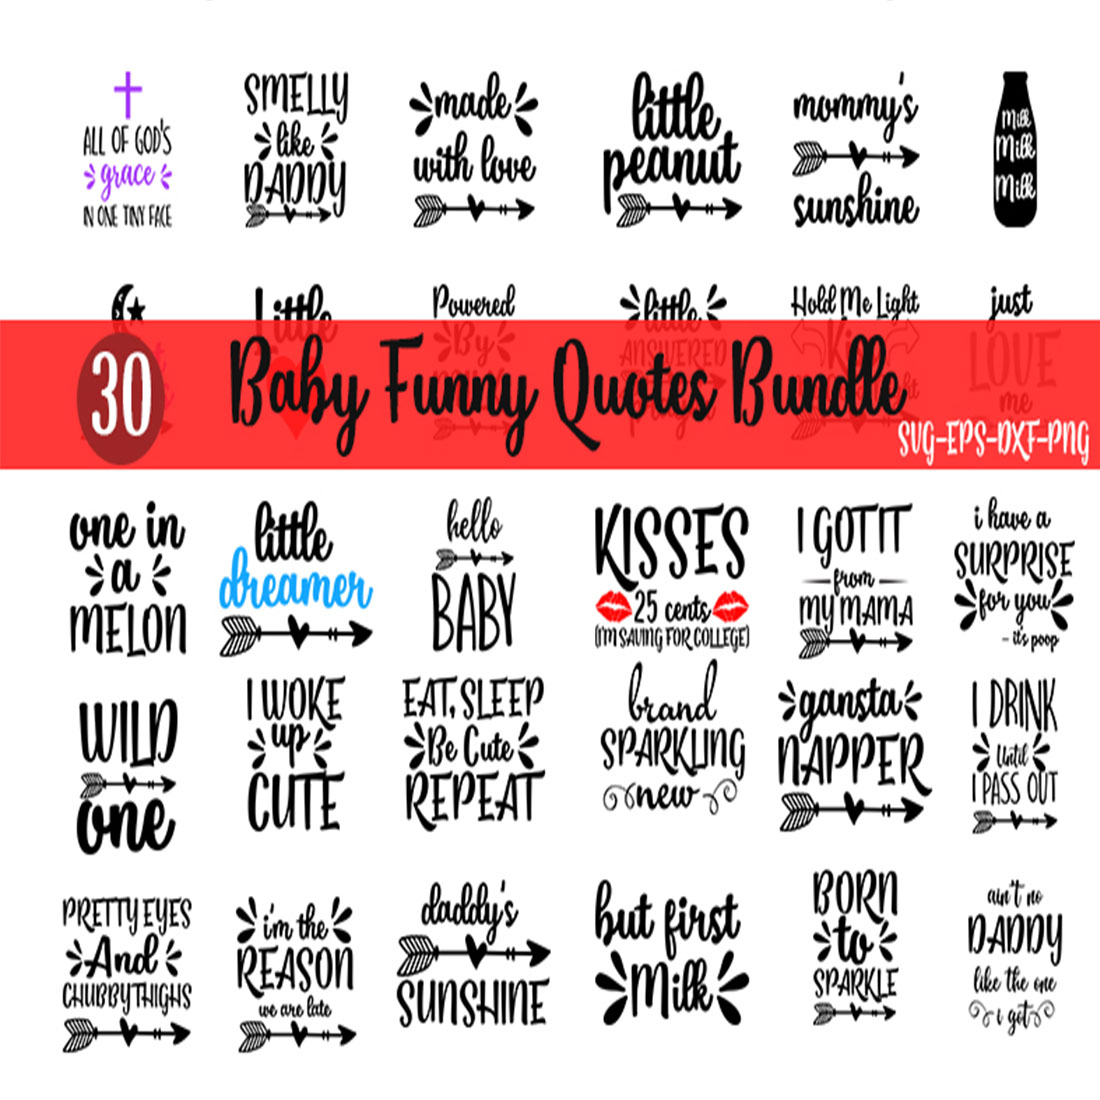 Baby Funny Quotes bundle cover image.